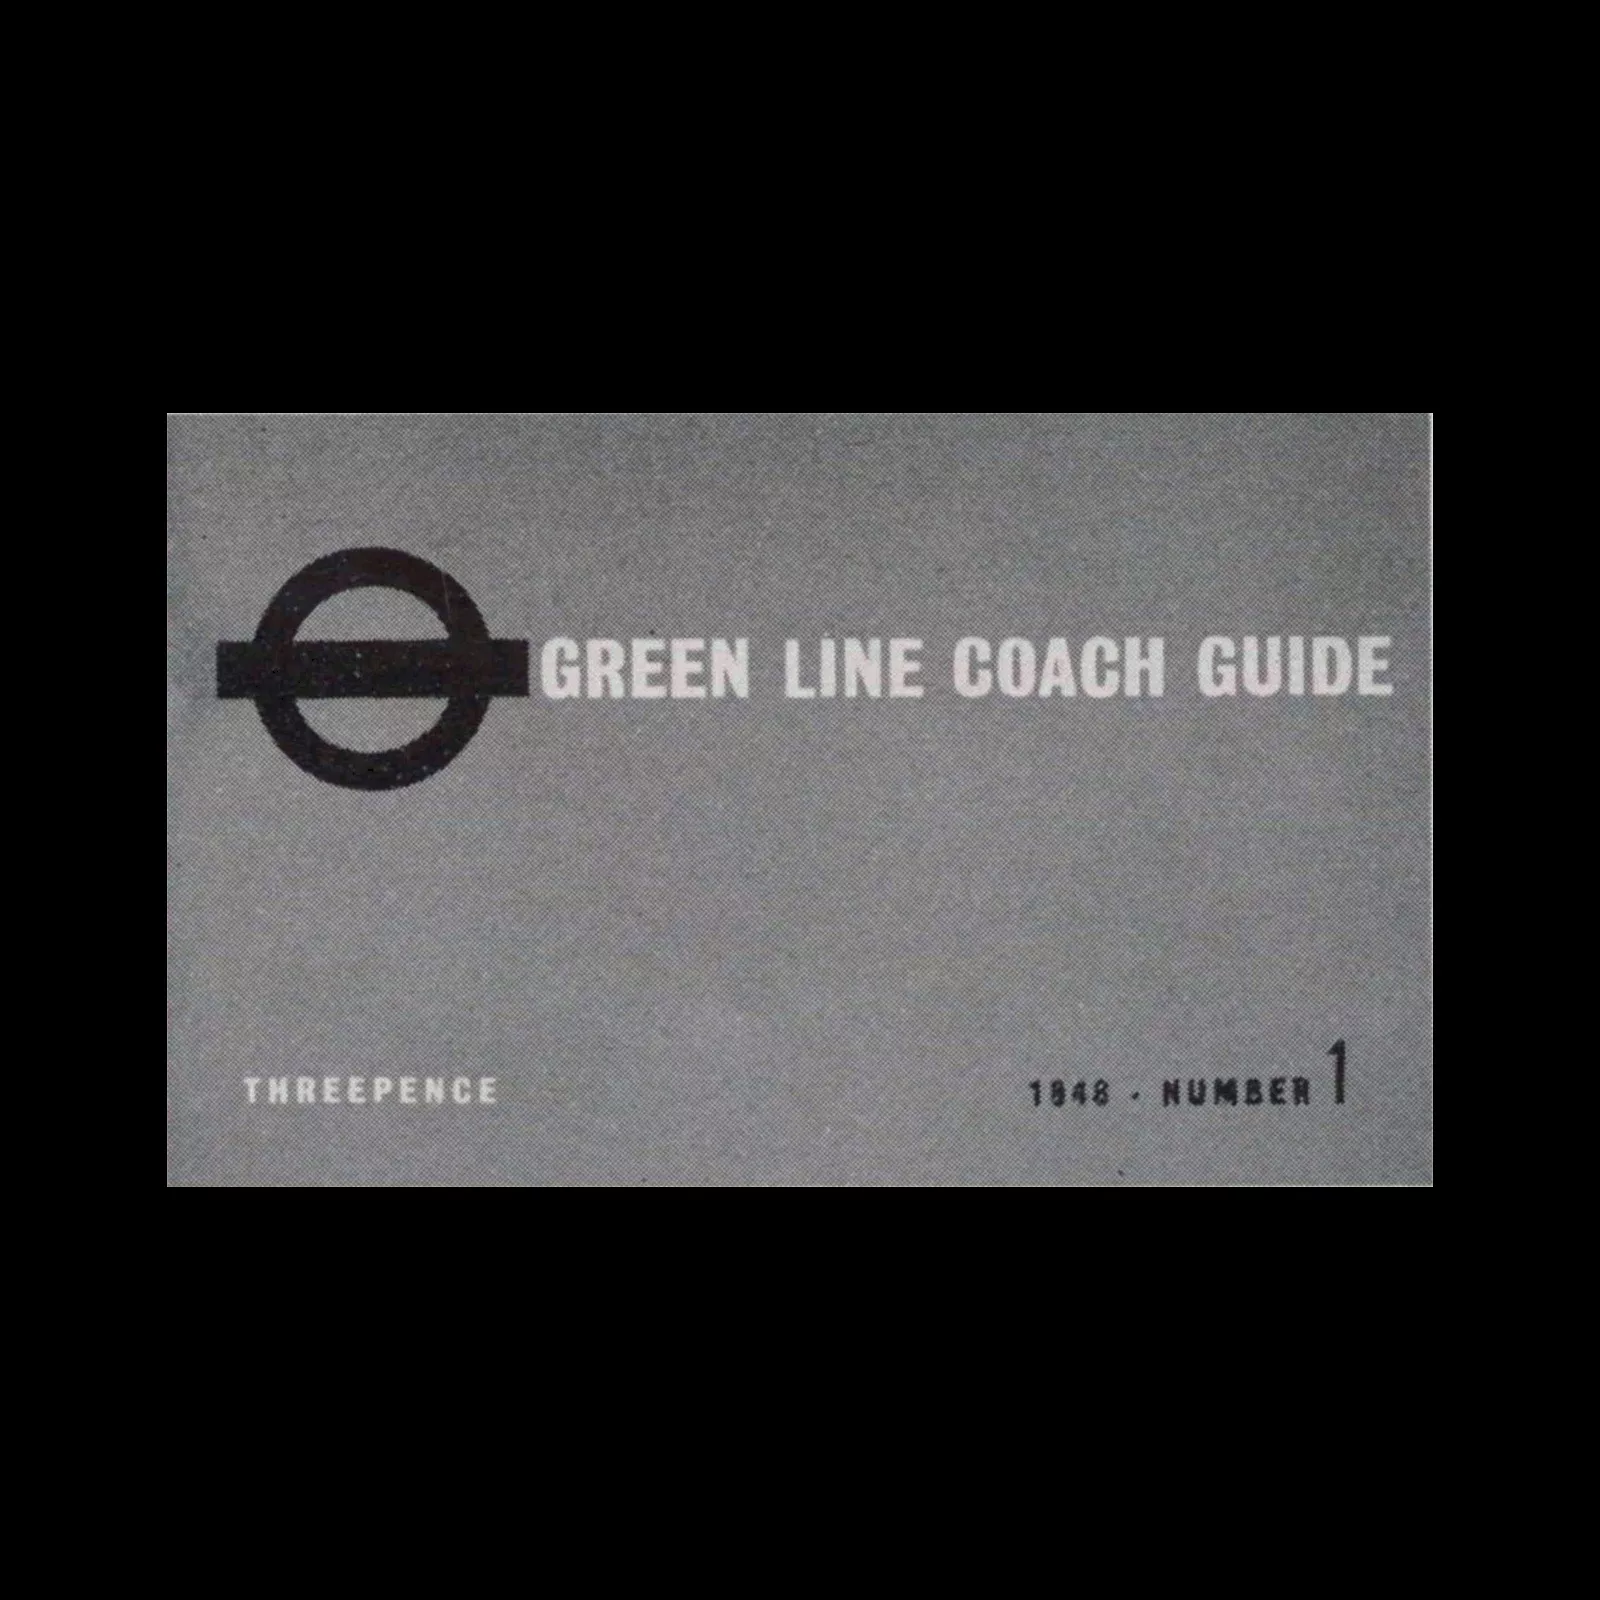 The simplest, most adaptable trademarks and symbols are likely to fit well into a house style. London Transport's crossed circle is instantly recognised even when seen without wording or with unexpected wording. 